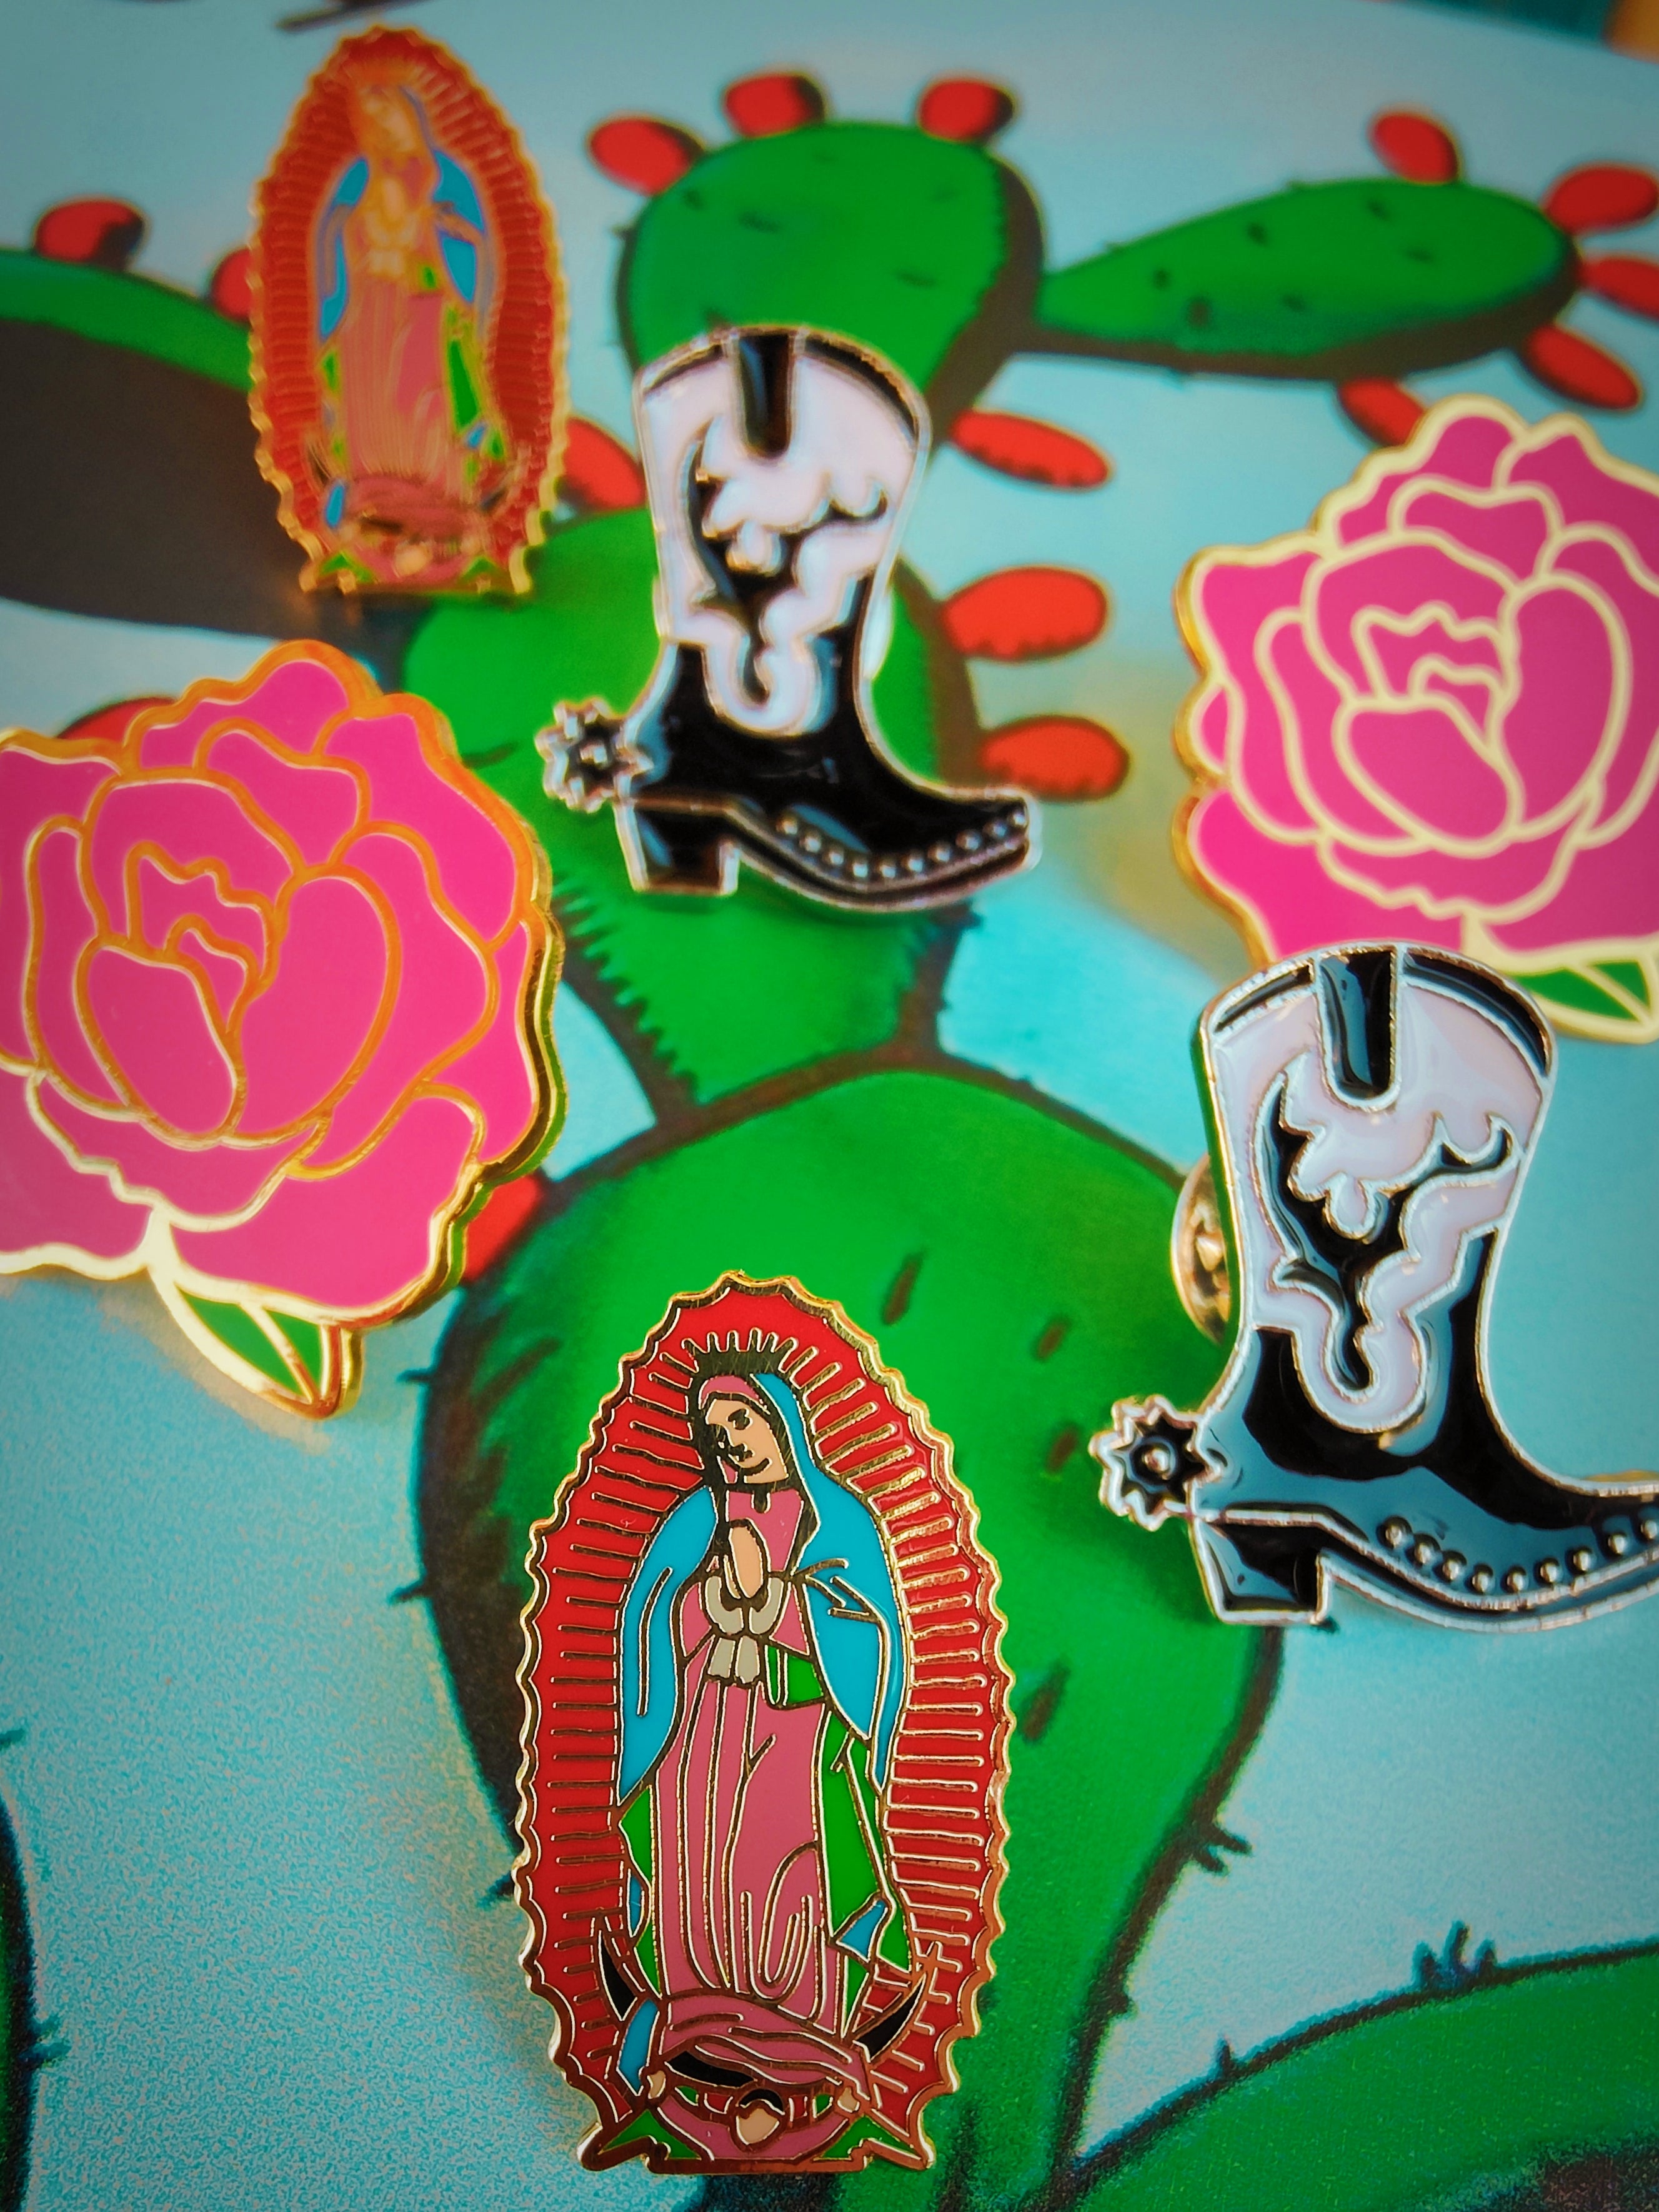 Decorate clothes, bags,and whatever else you can find with these gorgeous pins .A fantastic postable gift for all of your Mexican kitsch loving pals!

Enamelled metals.

